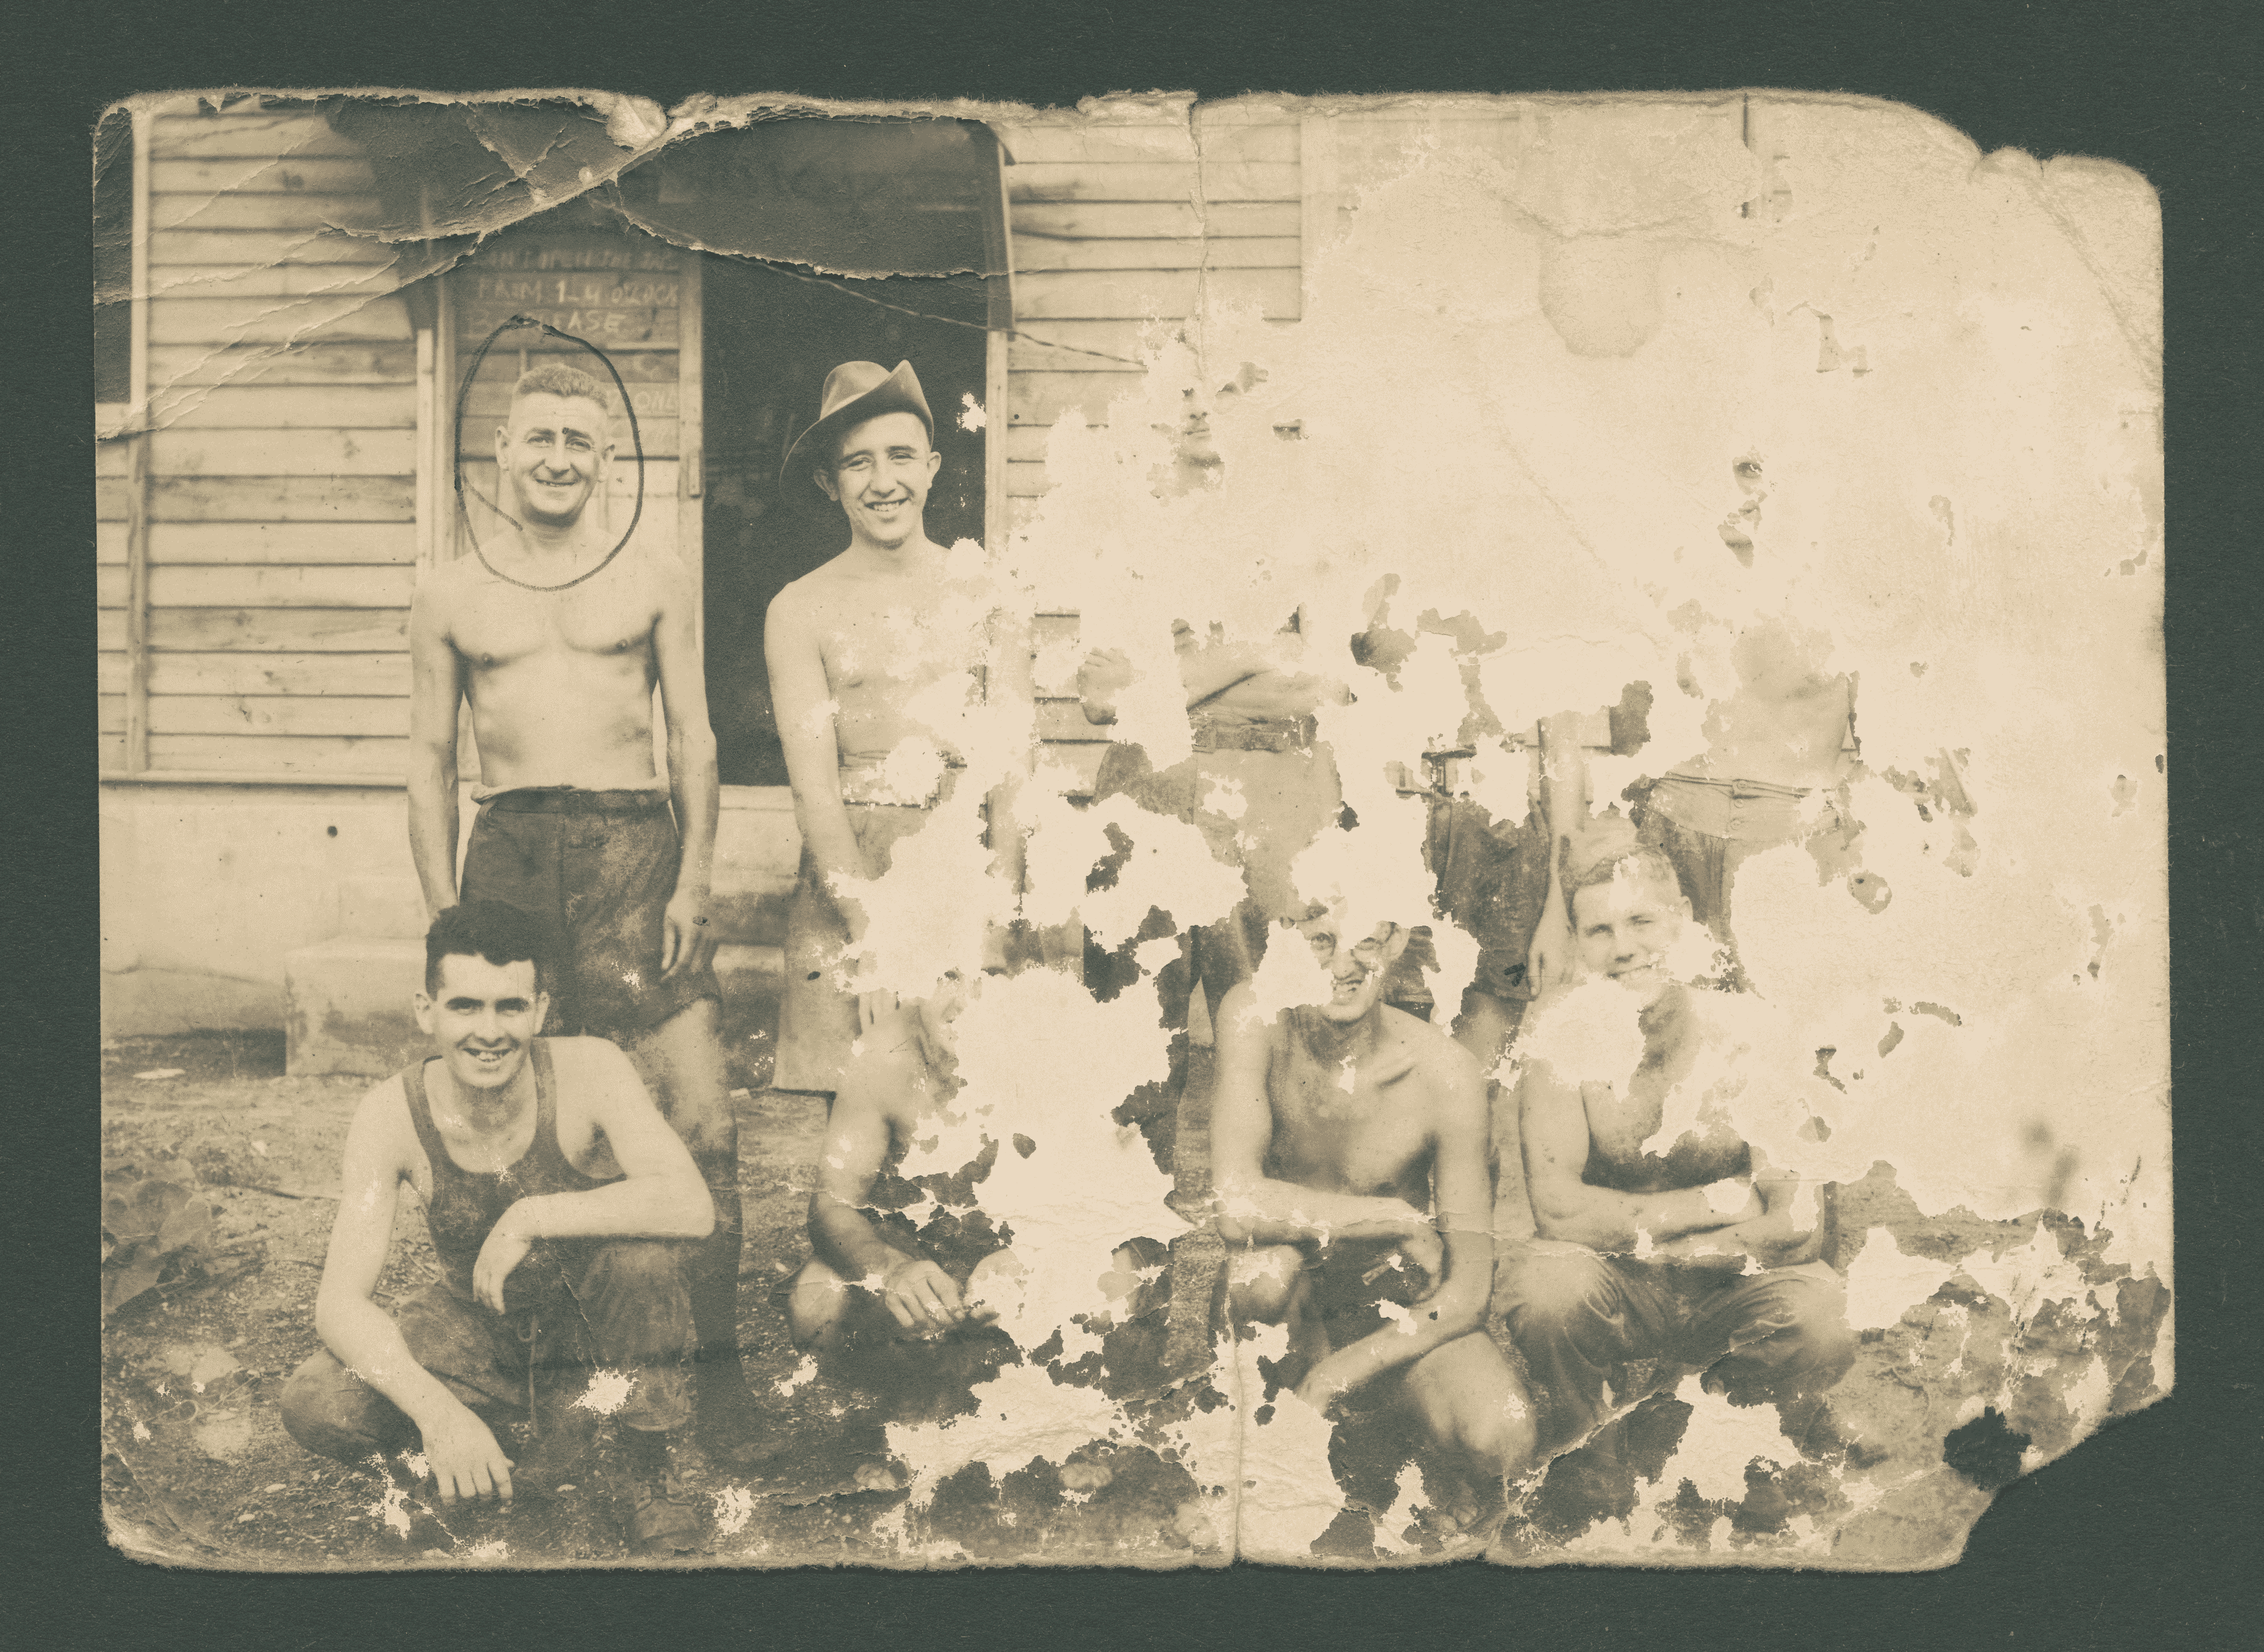 This sepia photo is so old and worn out that only 3 men are fully visible on it, out of 9. There is a row of men standing and a row below them crouching down. All men look directly to the camera smiling. They are either shirtless or wearing vests. They are all thin, their clothes don't fit them well.